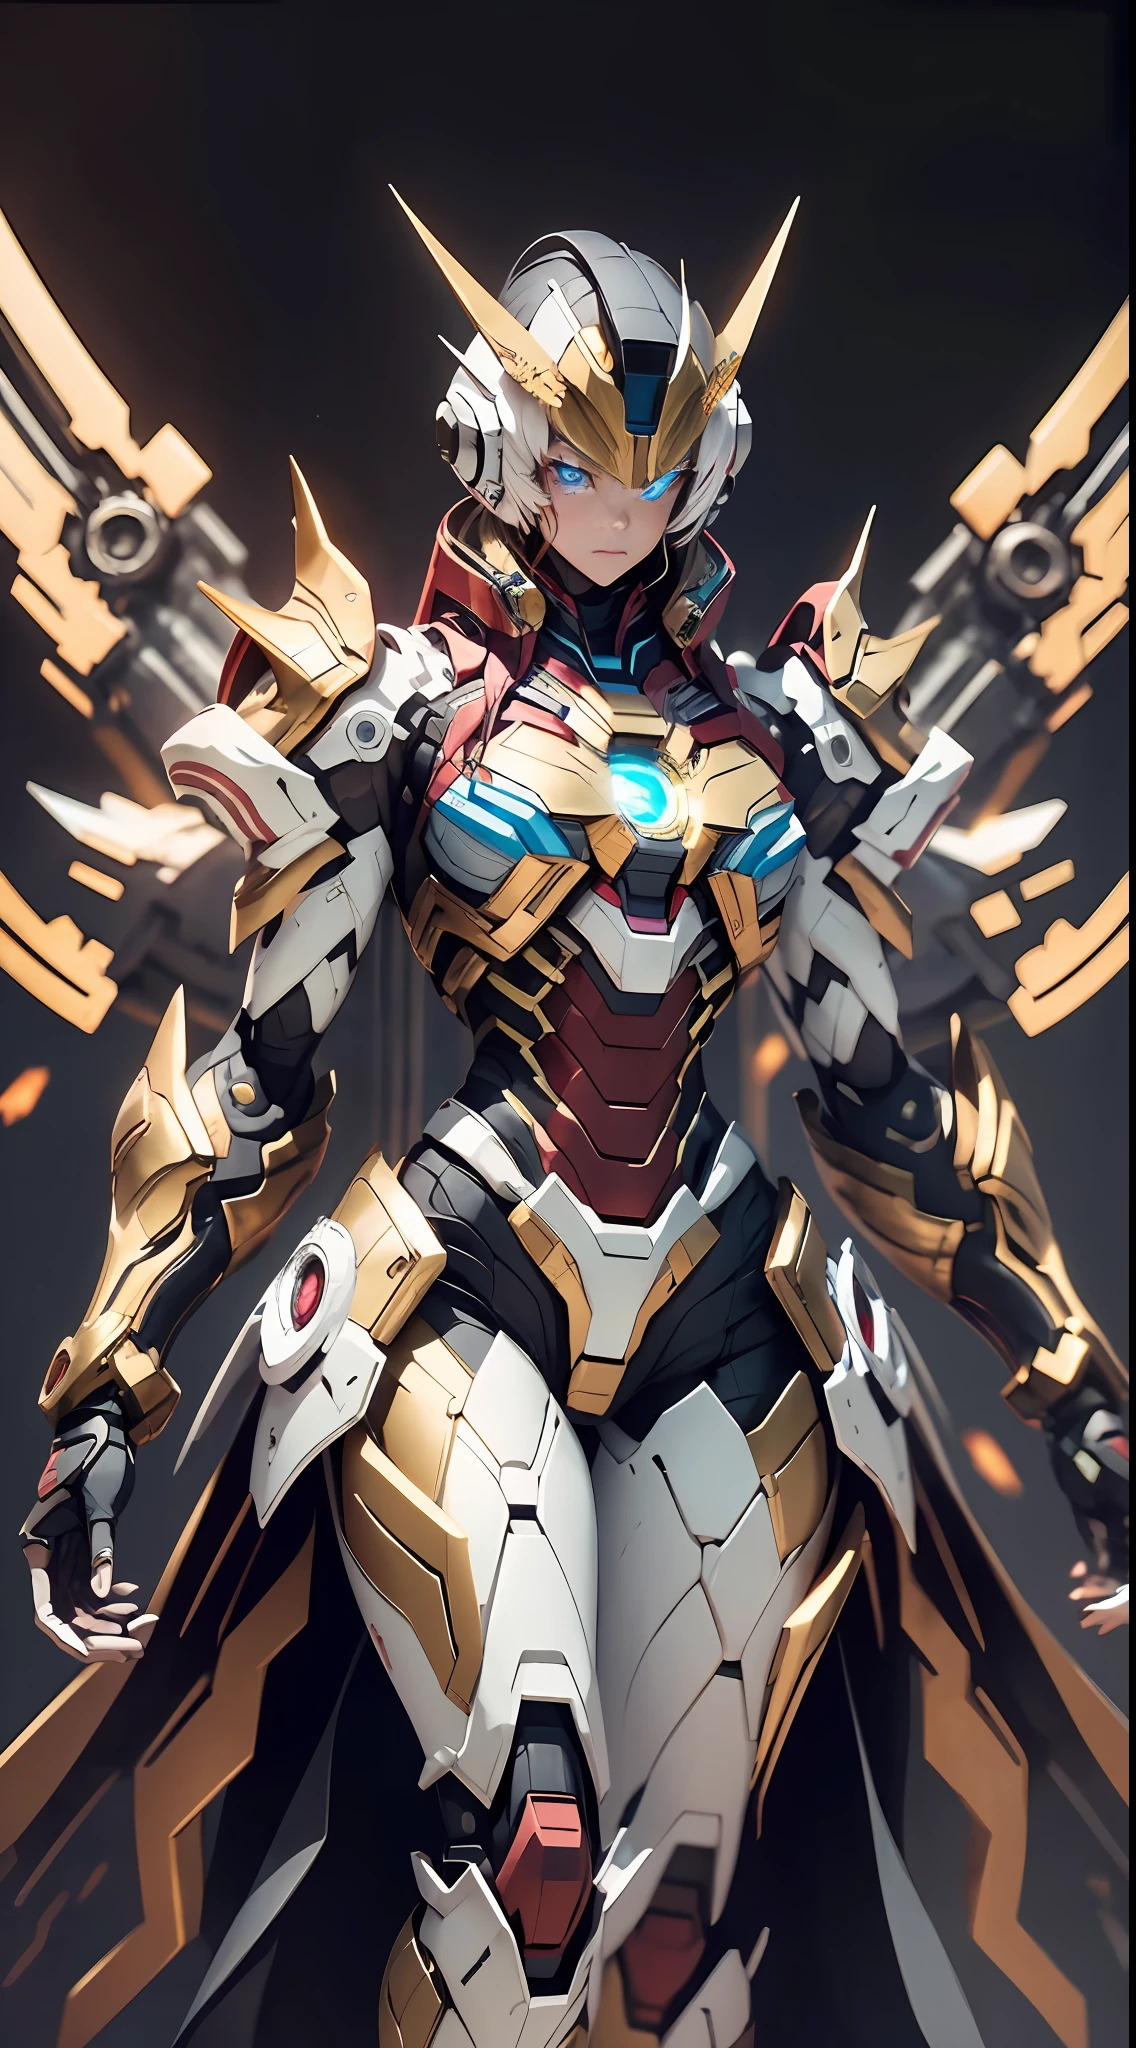 Golden Saint Seiya Limb Armor, Marvel Movie Iron Man Breastplate, (Gundam 00 Gundam Exia: 1.5), (Mecha) (Mechanical) (Armor), (Open Leg: 1.3), Perfect, (Wide Angle), (Black Background: 1.6), Best Quality, Masterpiece, Super Resolution, (Reality: 1.4), 1 Girl, Bare Shoulders, Cold Eyes, Crazy Details, (Hip Folds: 1.2), Lower Chest, Side Chest, Unrealistic Engine Style, Boca Effect, David S. La Chapelle style lens, bioluminescent palette: light blue, light gold, light pink, bright white, wide angle, ultra-fine, cinematic still life, vibrant, Sakimichan style, perfect eyes, highest image quality 8K, inspired by Harry Winston, Canon EOS R 6 shooting masterpiece "Chaos 50,--, under eye mole, ray tracing, surrealism, textured skin